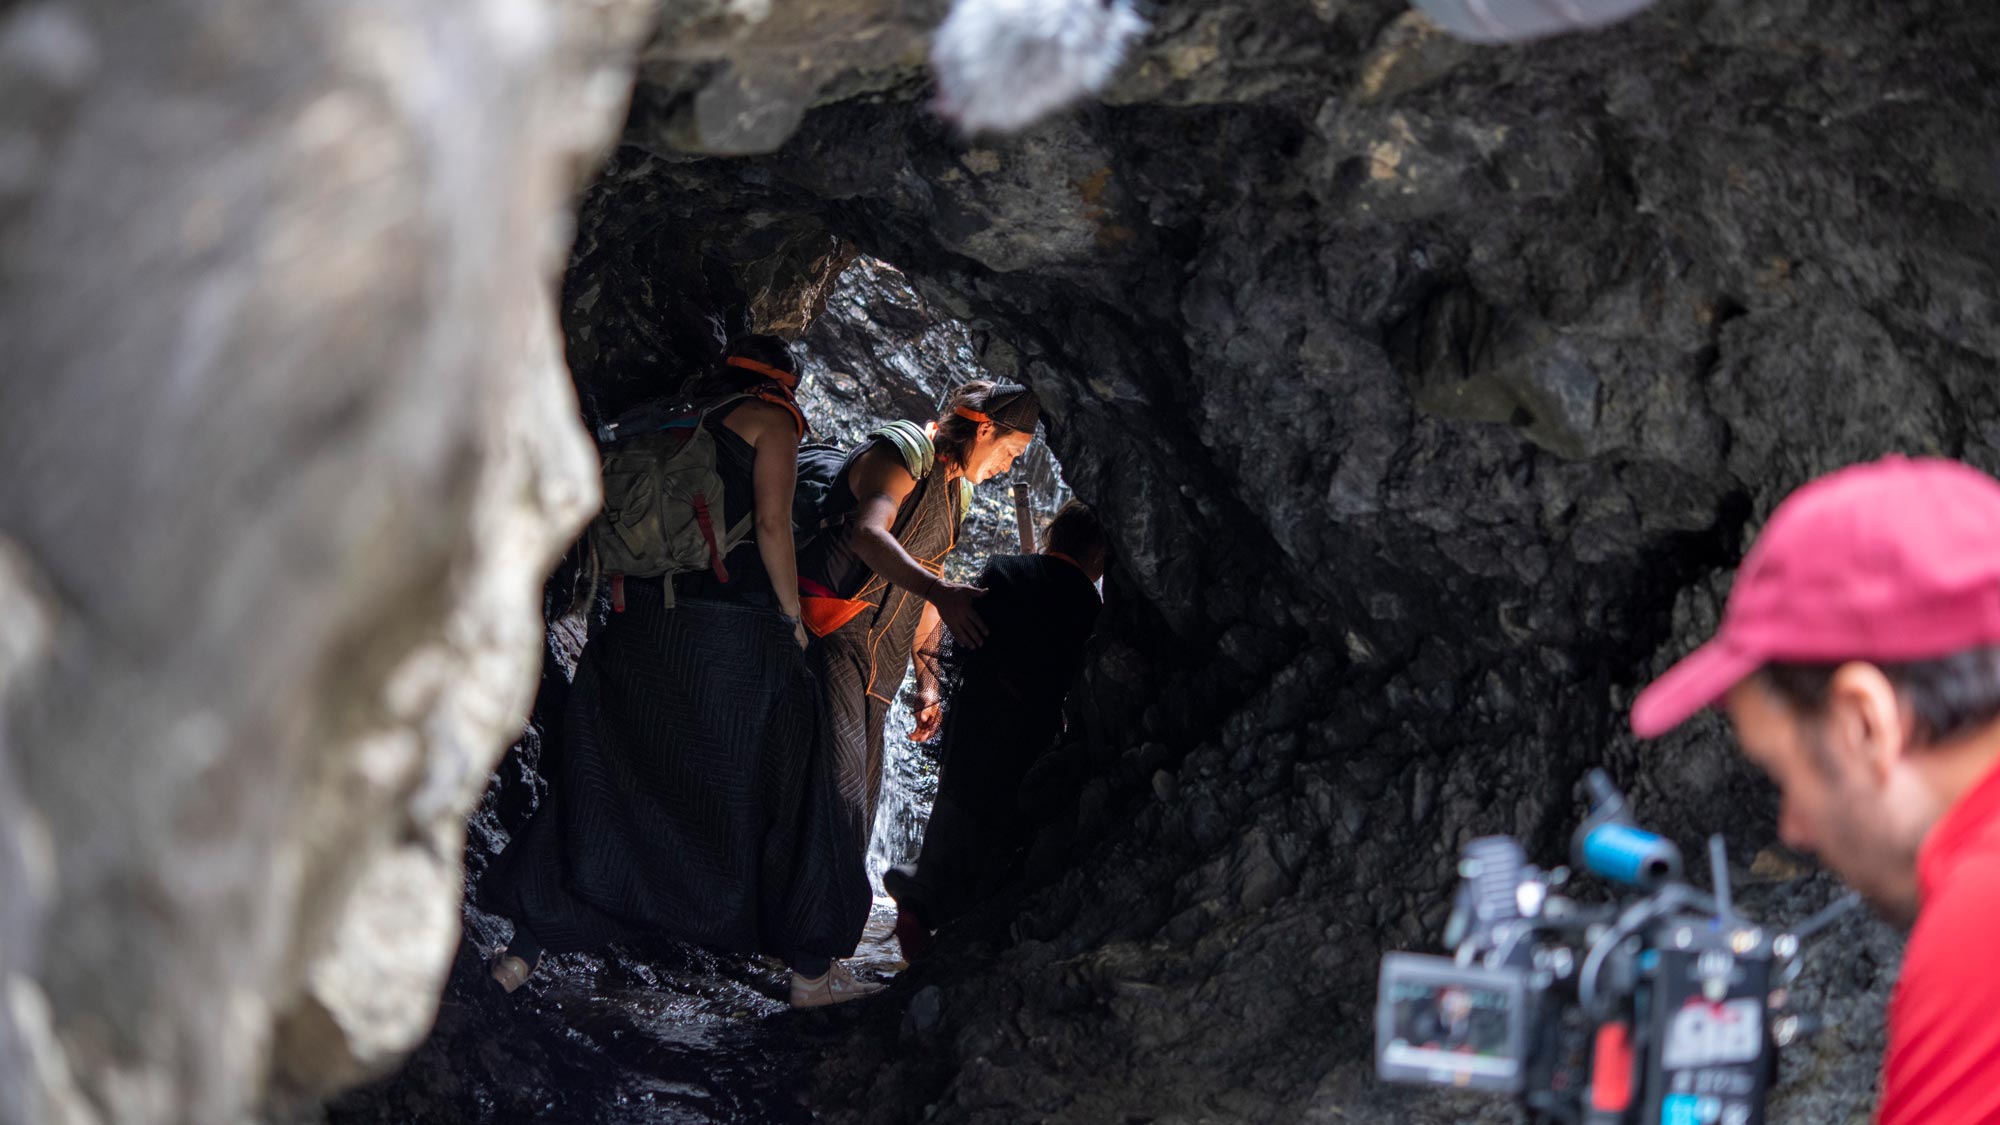 a camera person in the foreground directs a young child and adult in a cave 